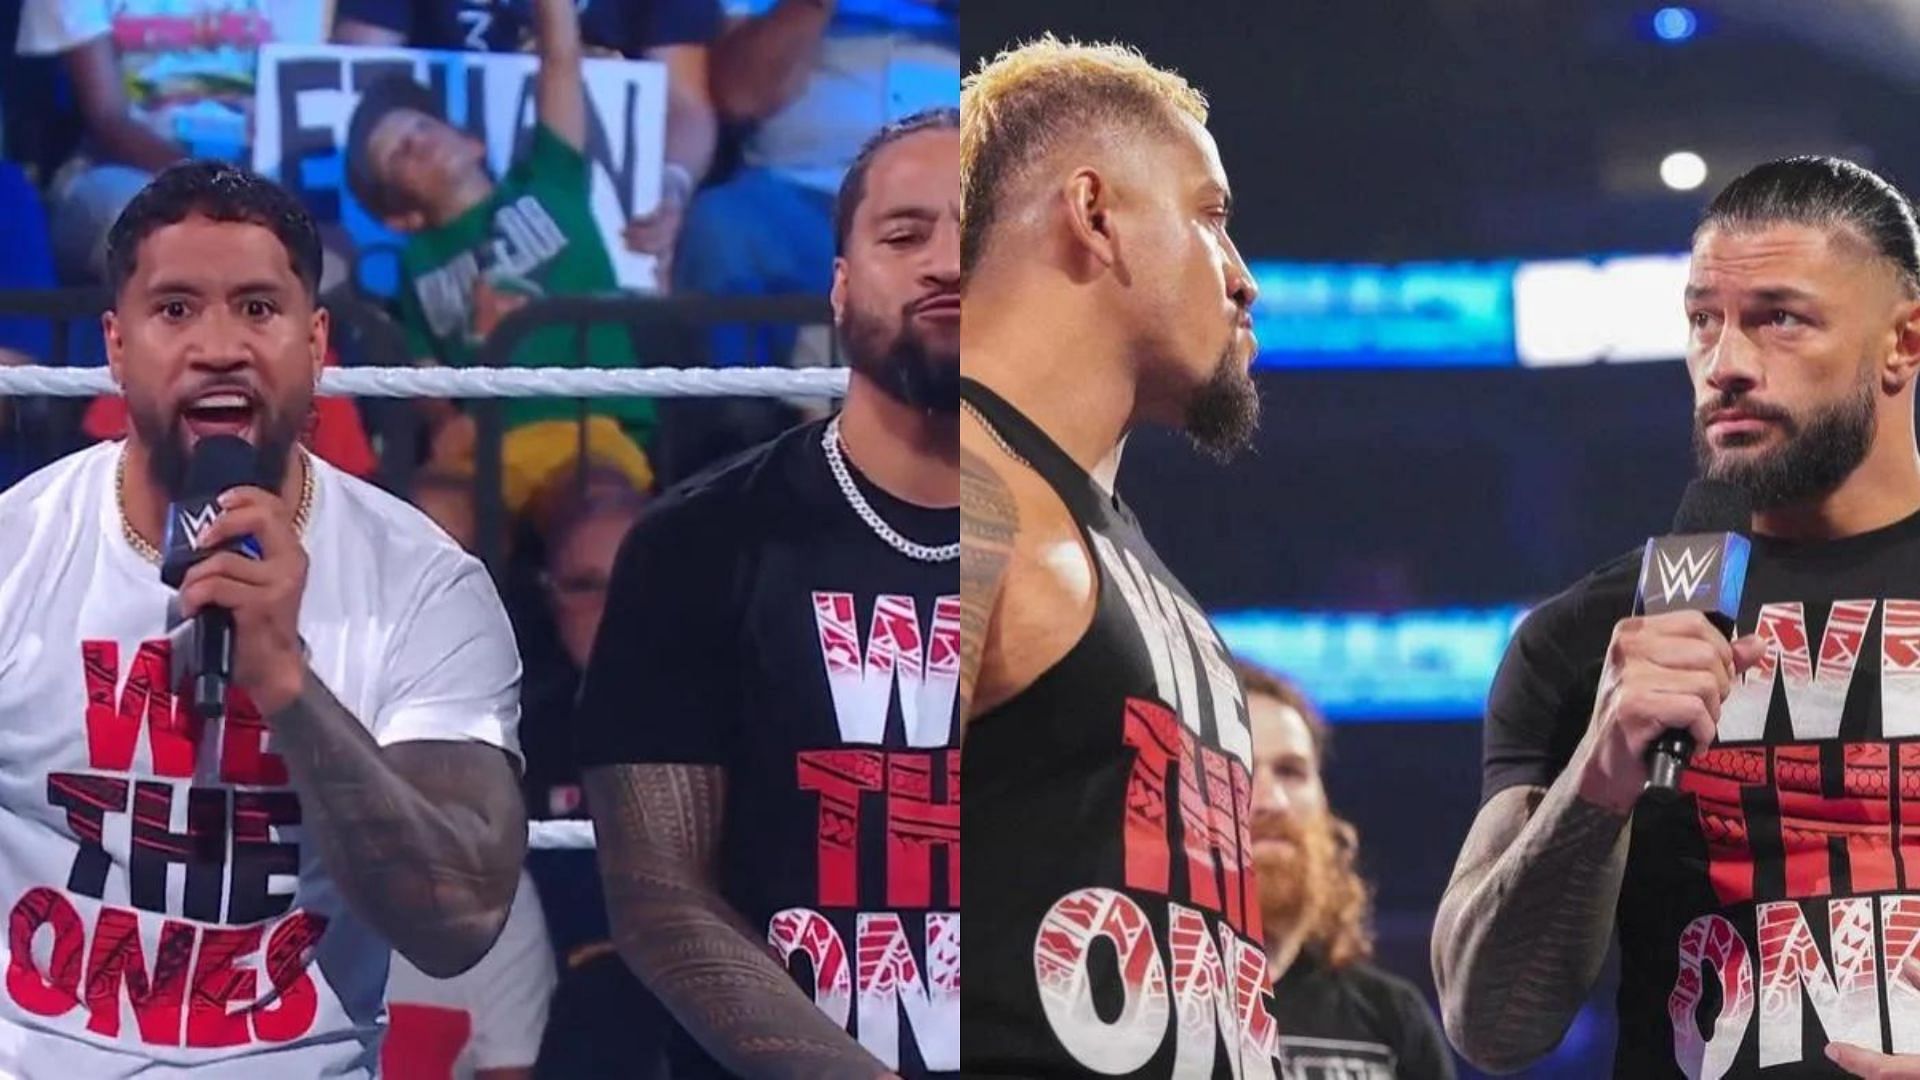 The Usos will face Roman Reigns and Solo Sikoa at Money in the Bank